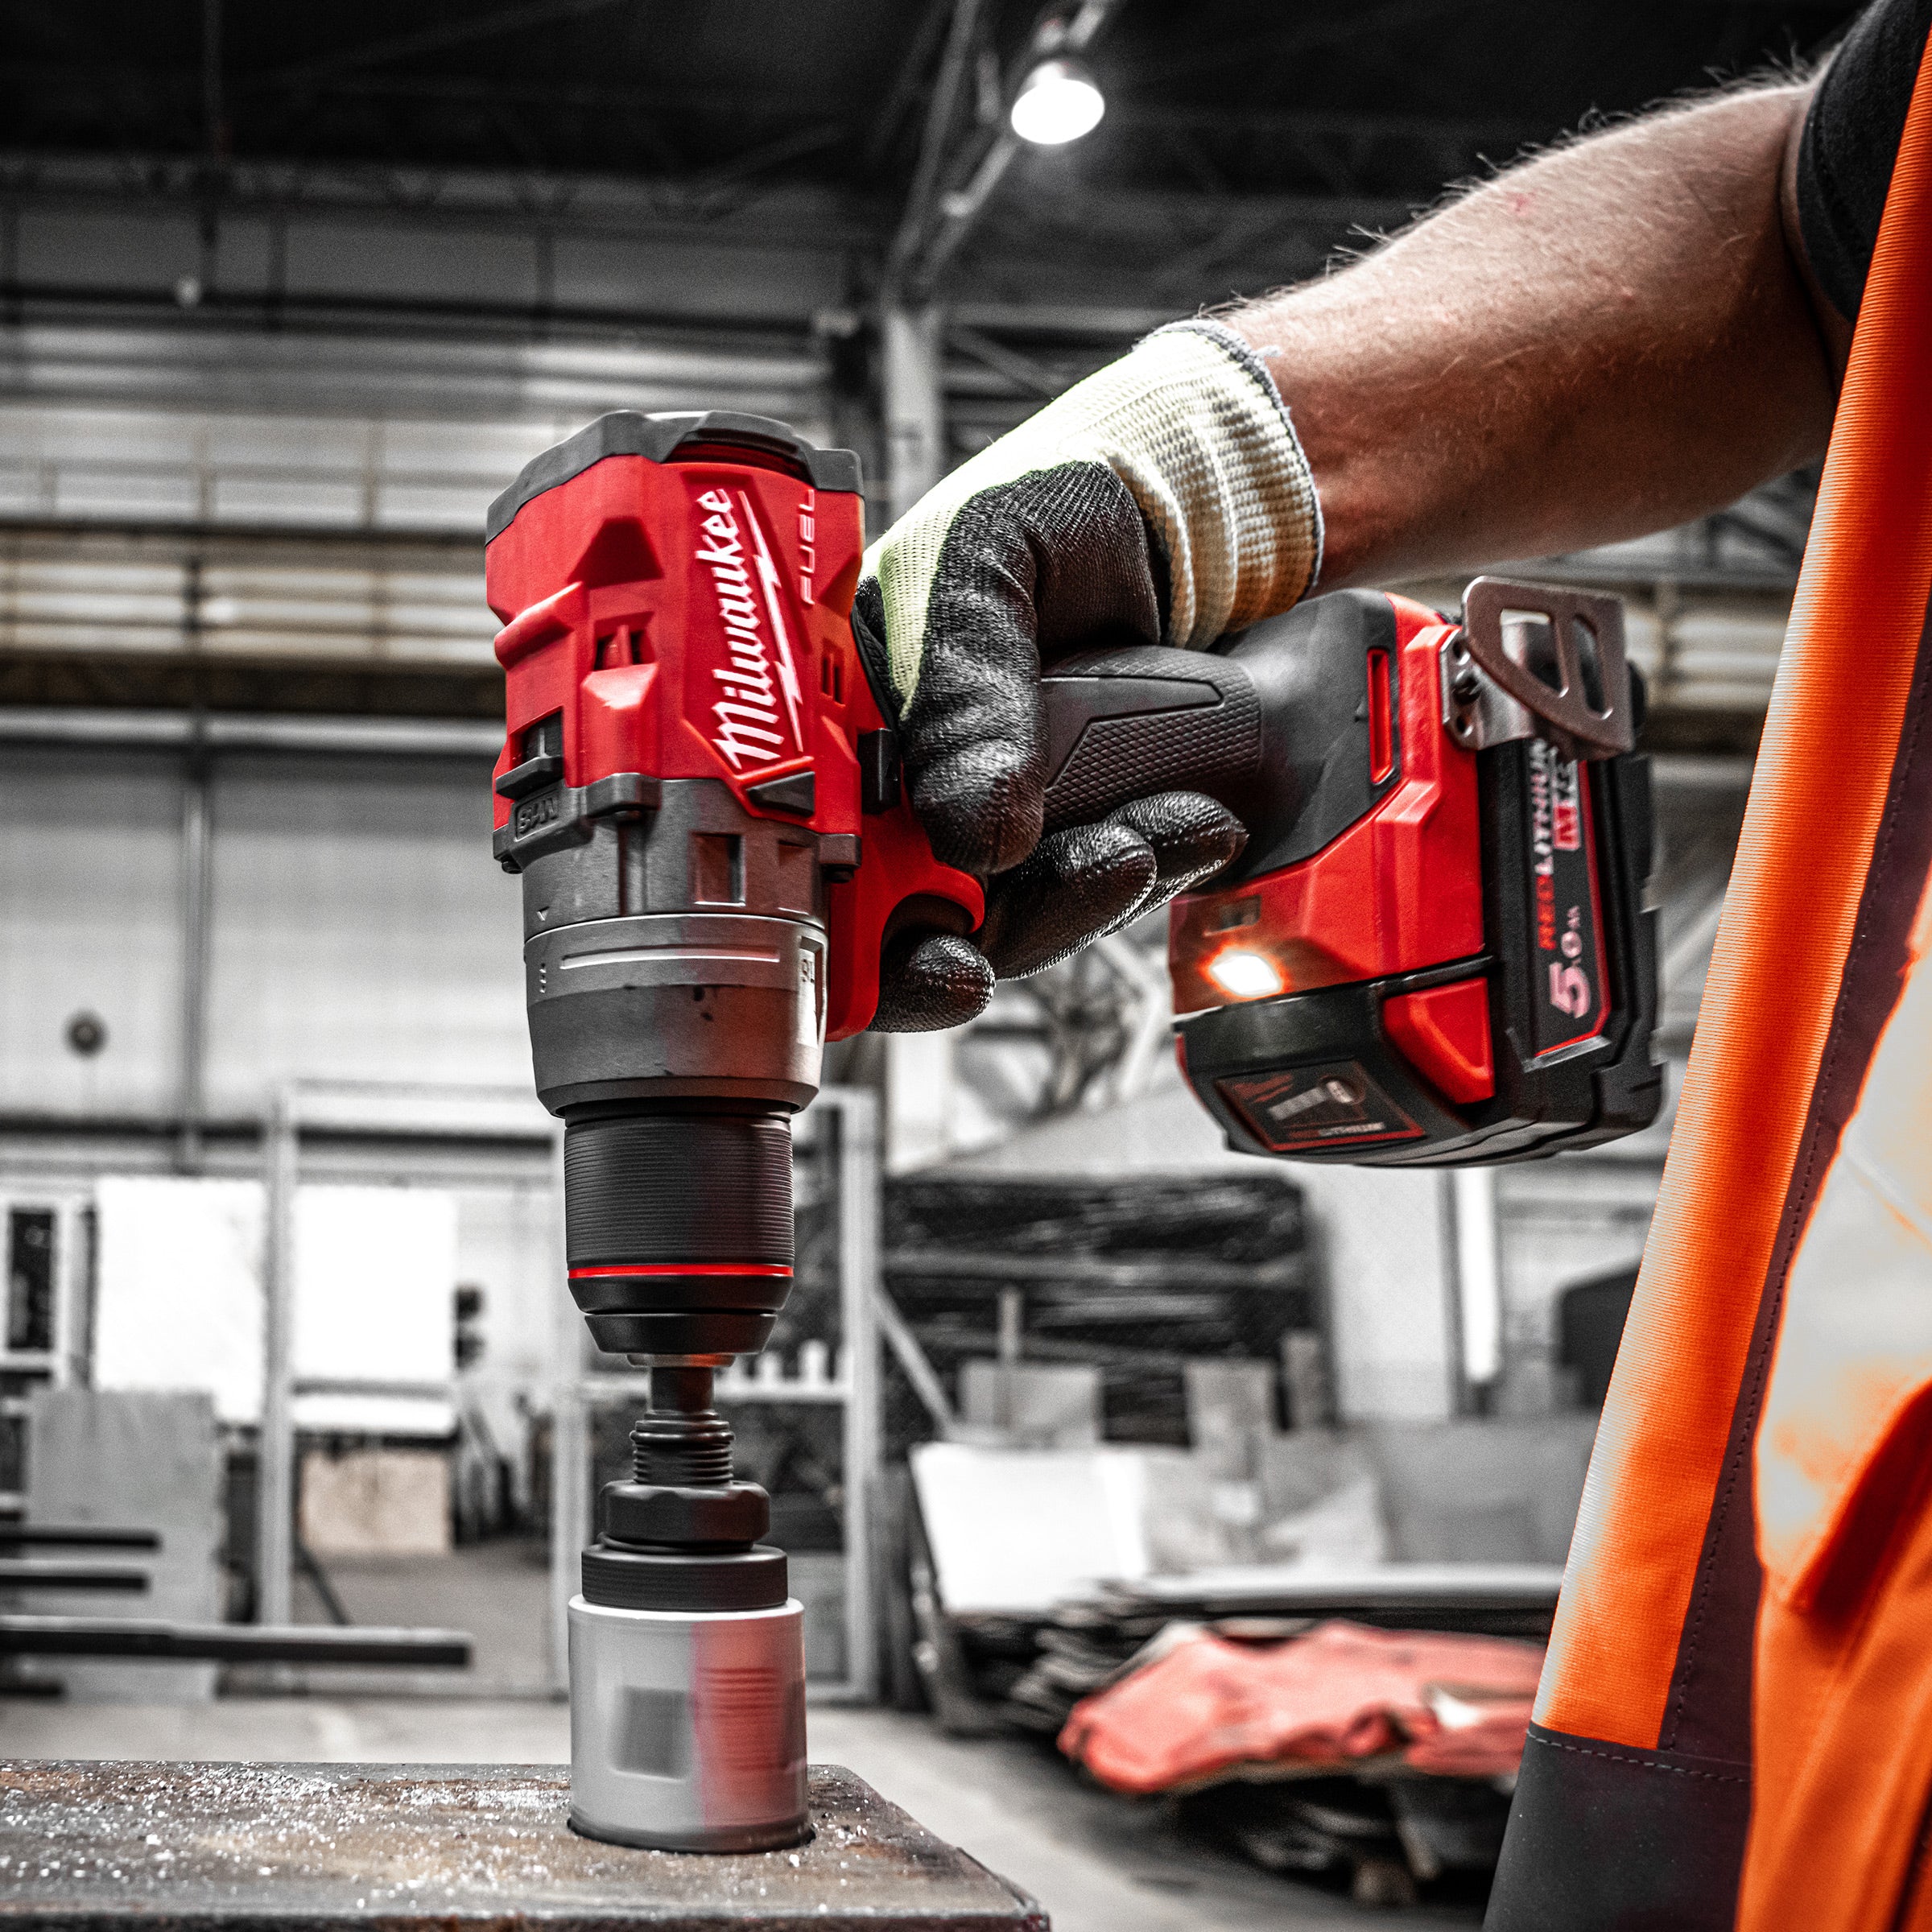 Milwaukee M18FPD3-0 18V Fuel Brushless Combi Drill with 1 x 5.0Ah Battery Charger & Carry Case